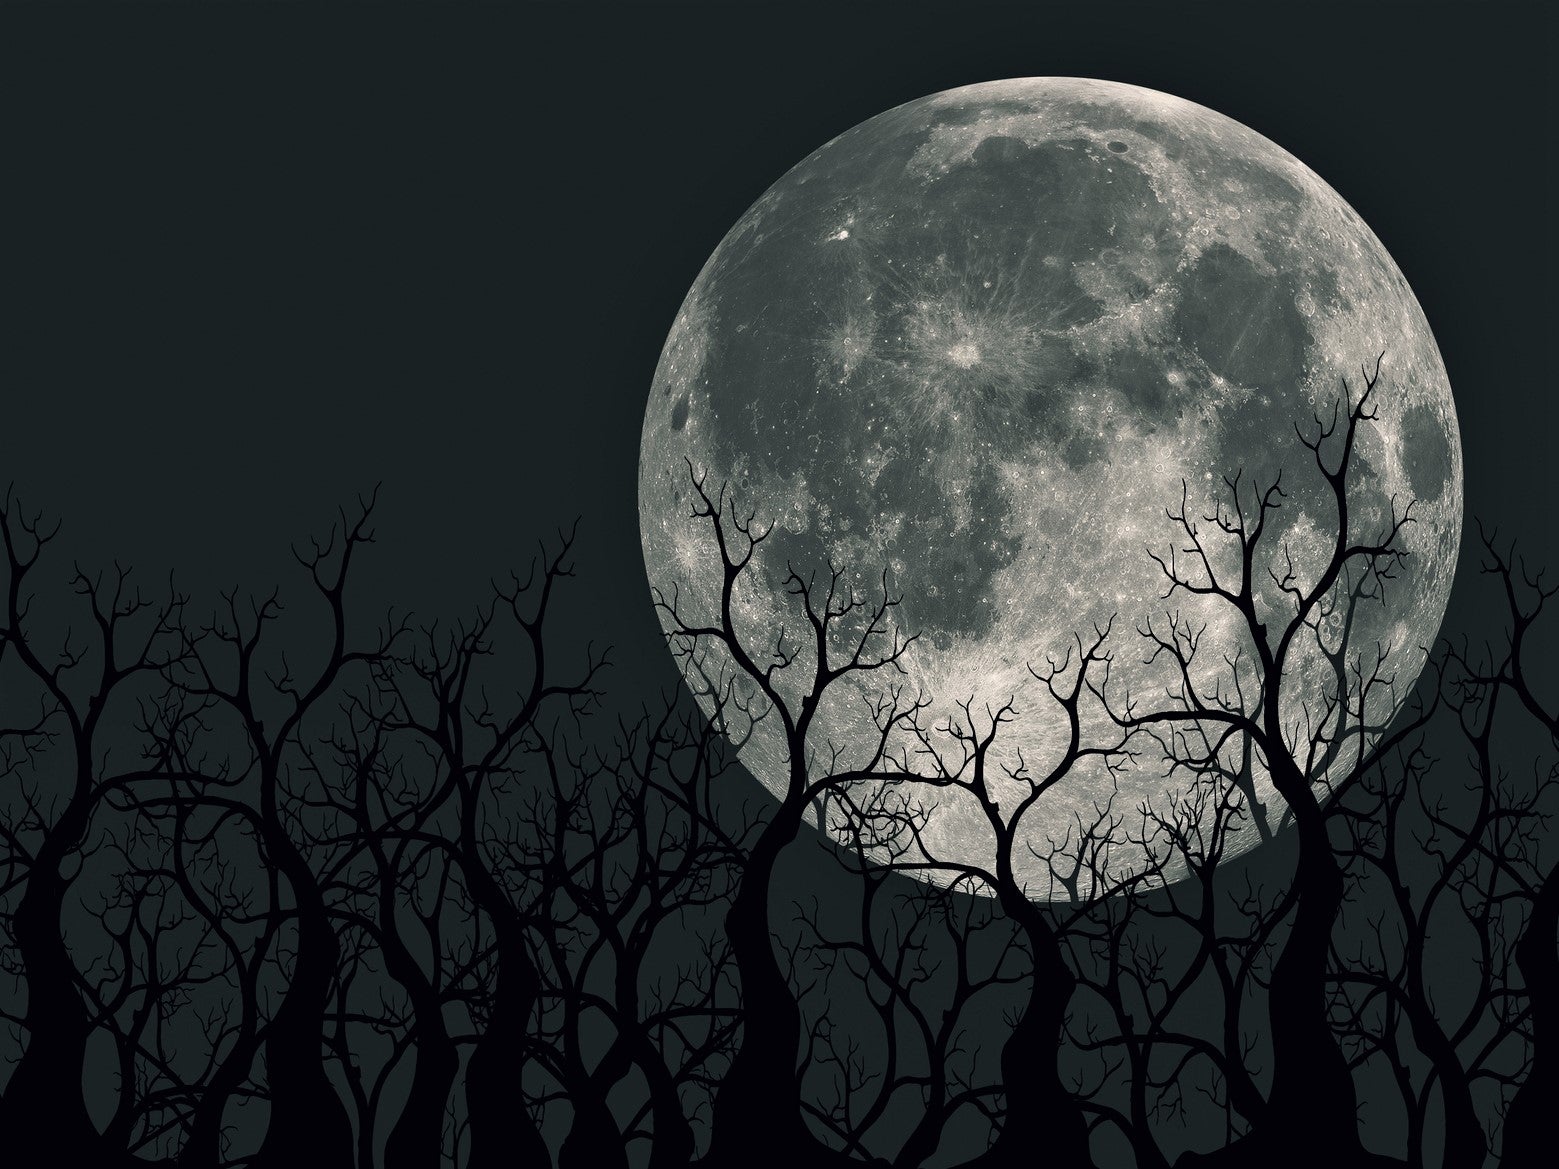 The full moon on 18 December will take place on one of the longest nights of the year